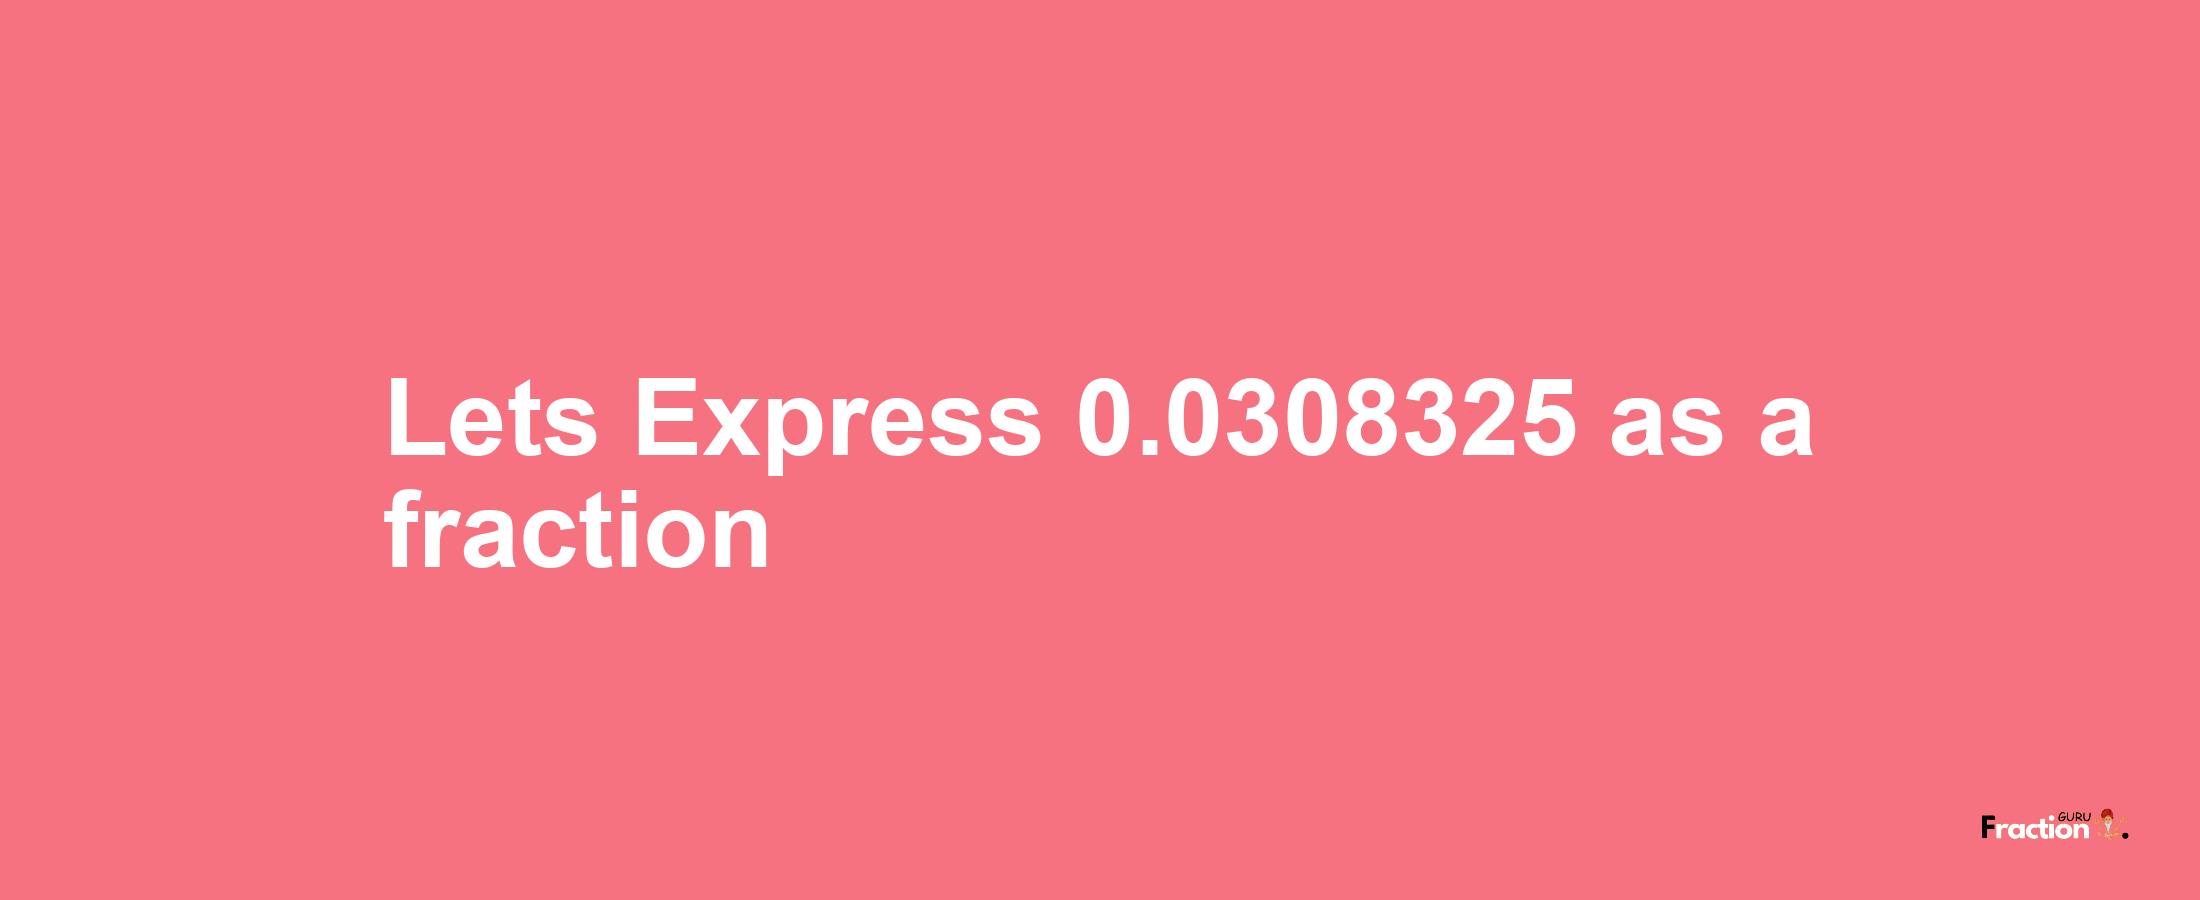 Lets Express 0.0308325 as afraction